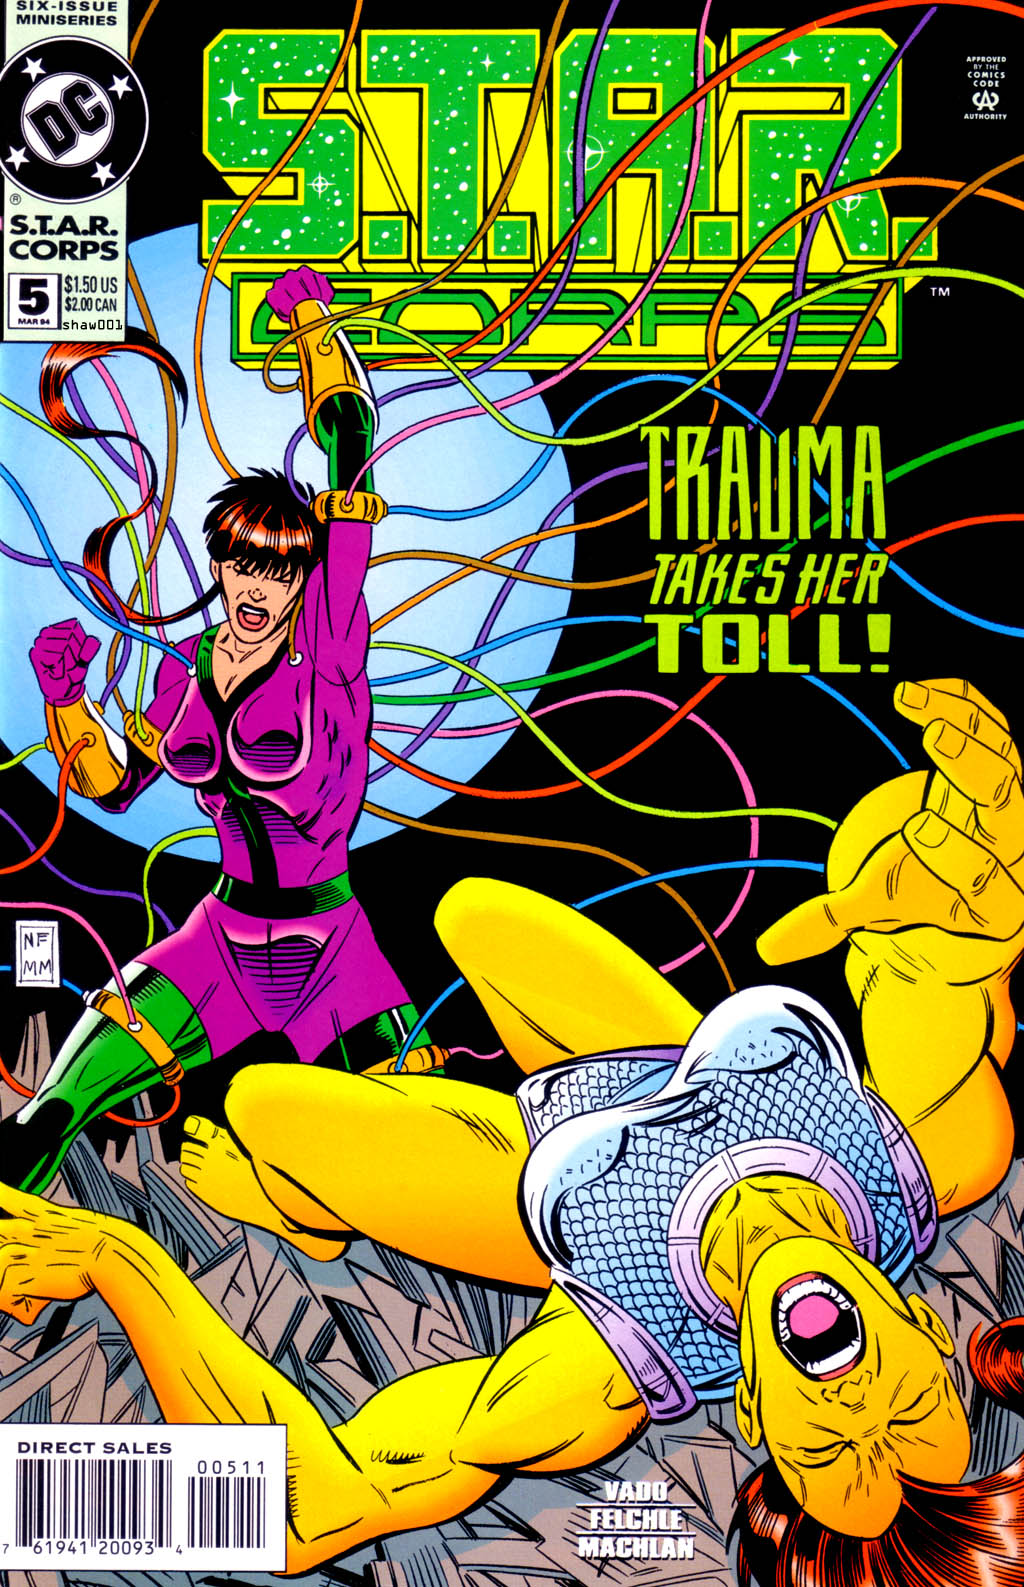 Read online S.T.A.R. Corps comic -  Issue #5 - 1